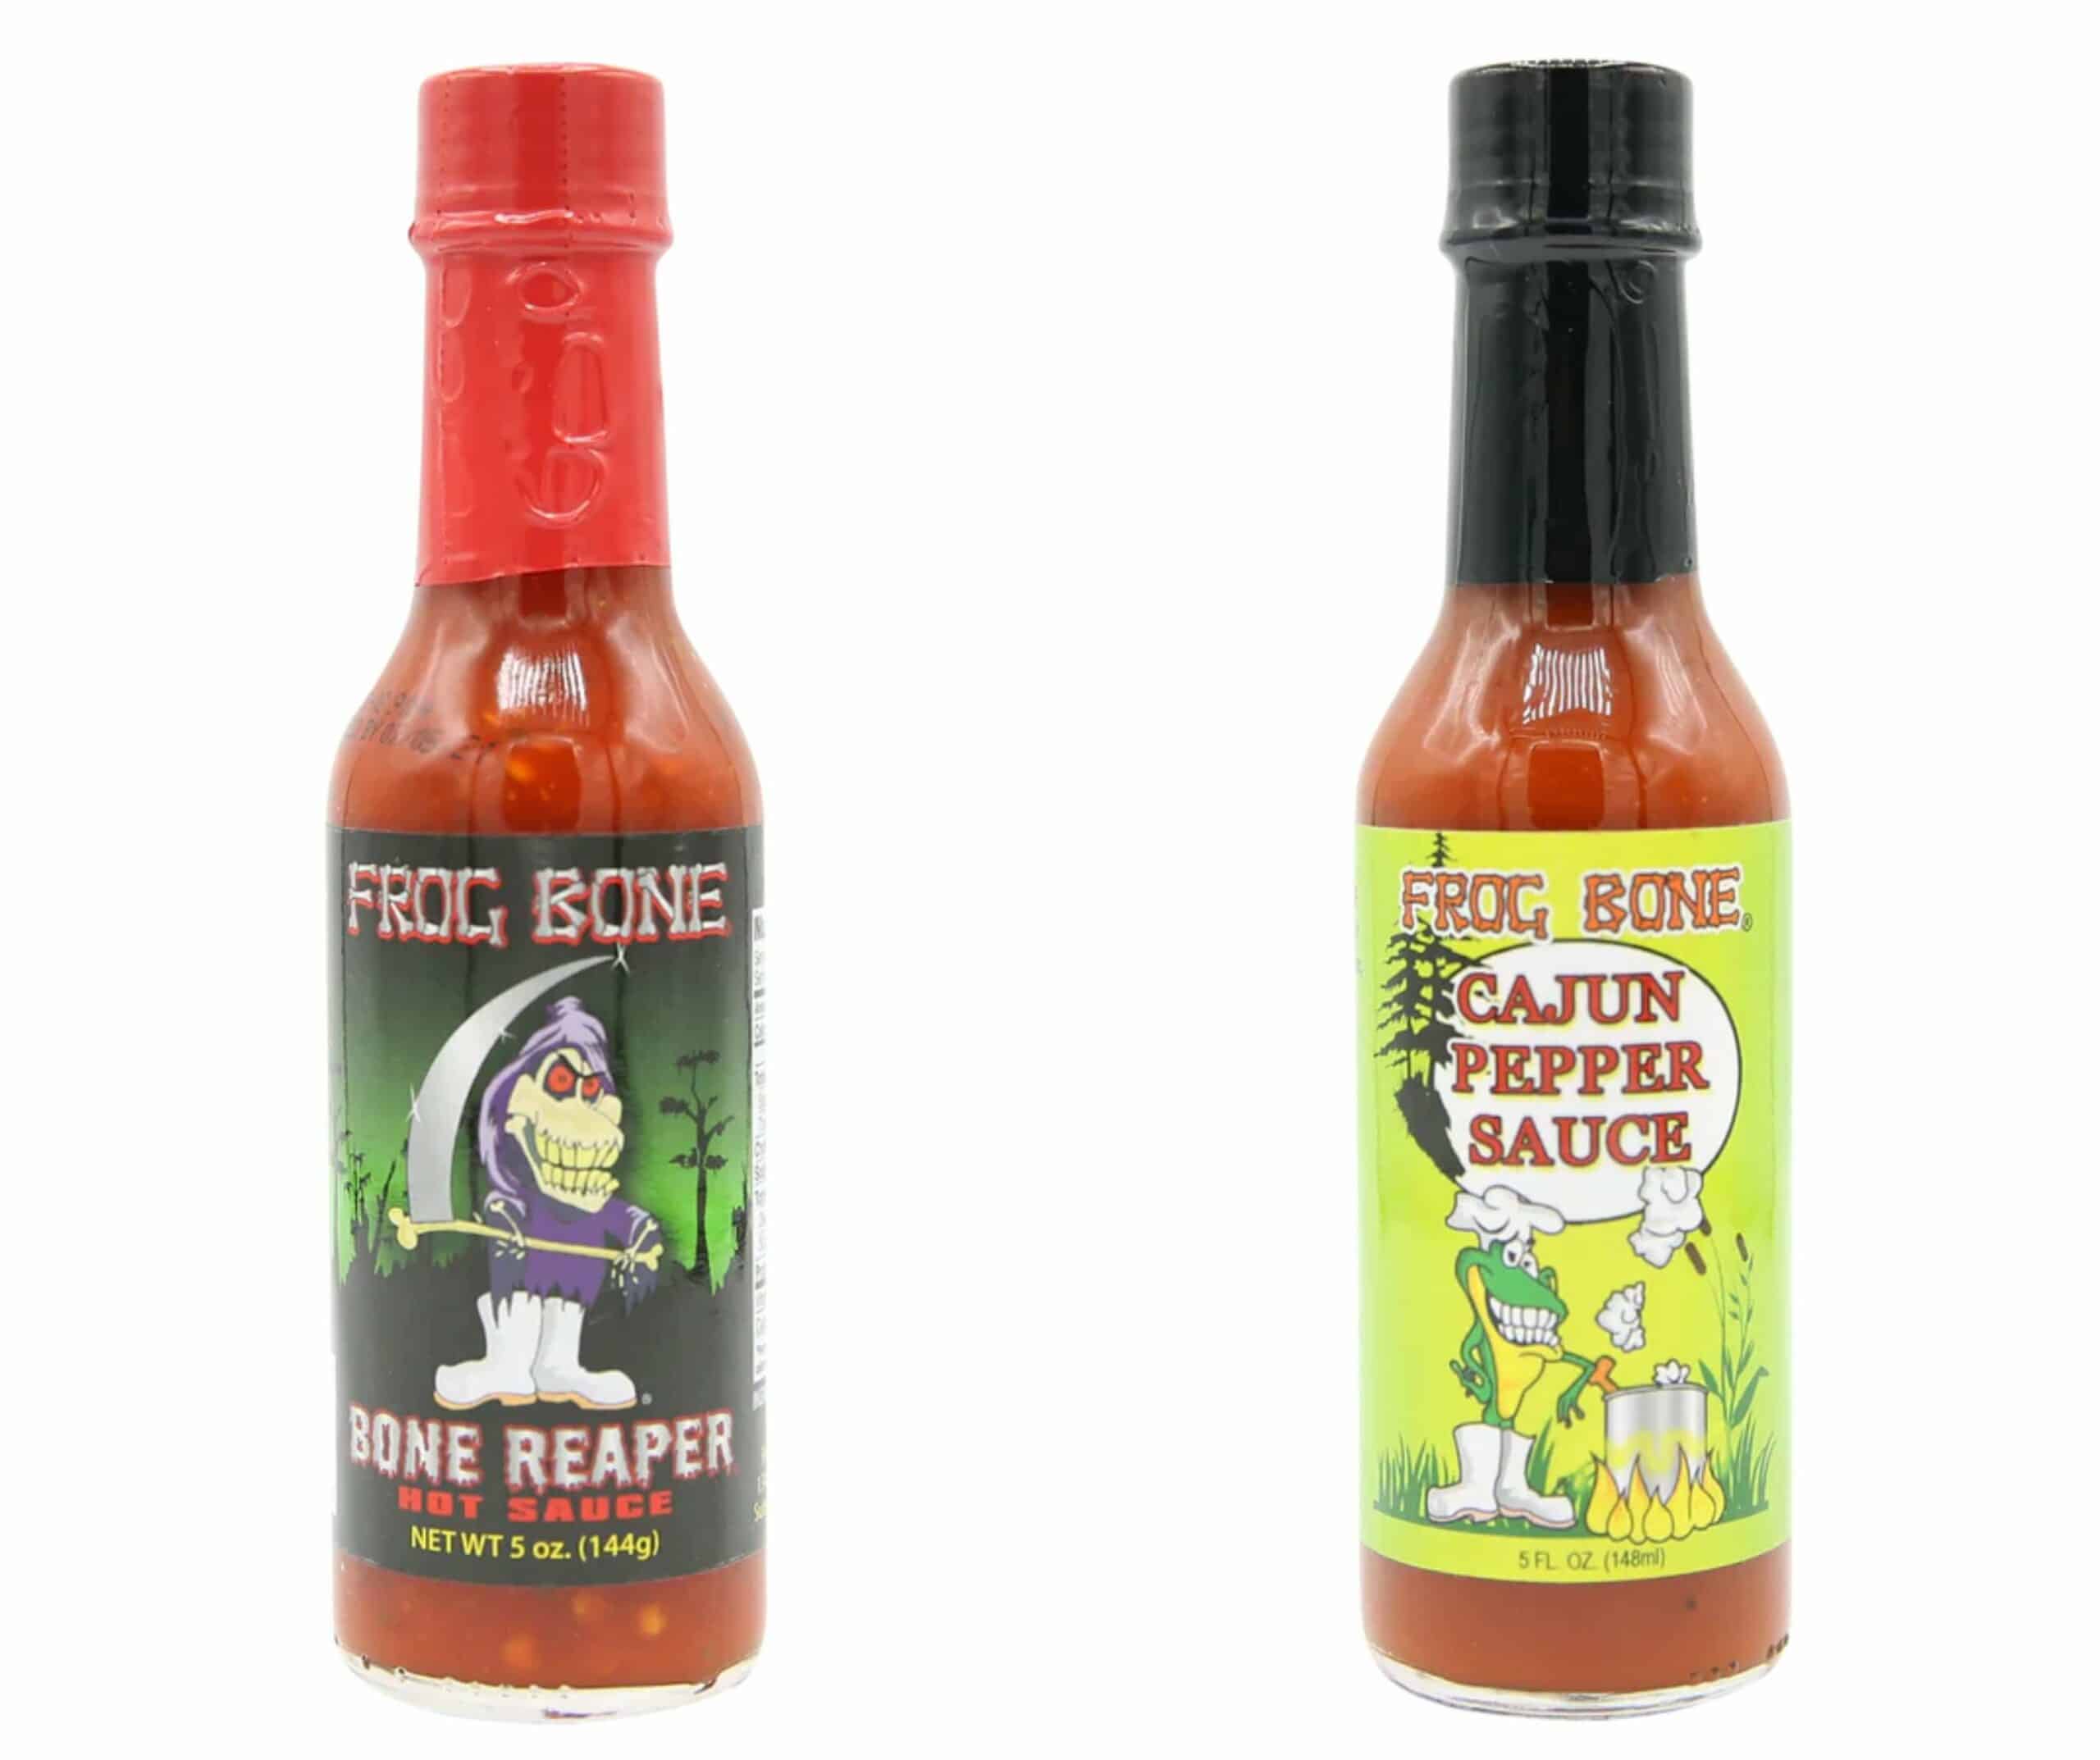 Louisiana Hot Sauce Gifts & Merchandise for Sale